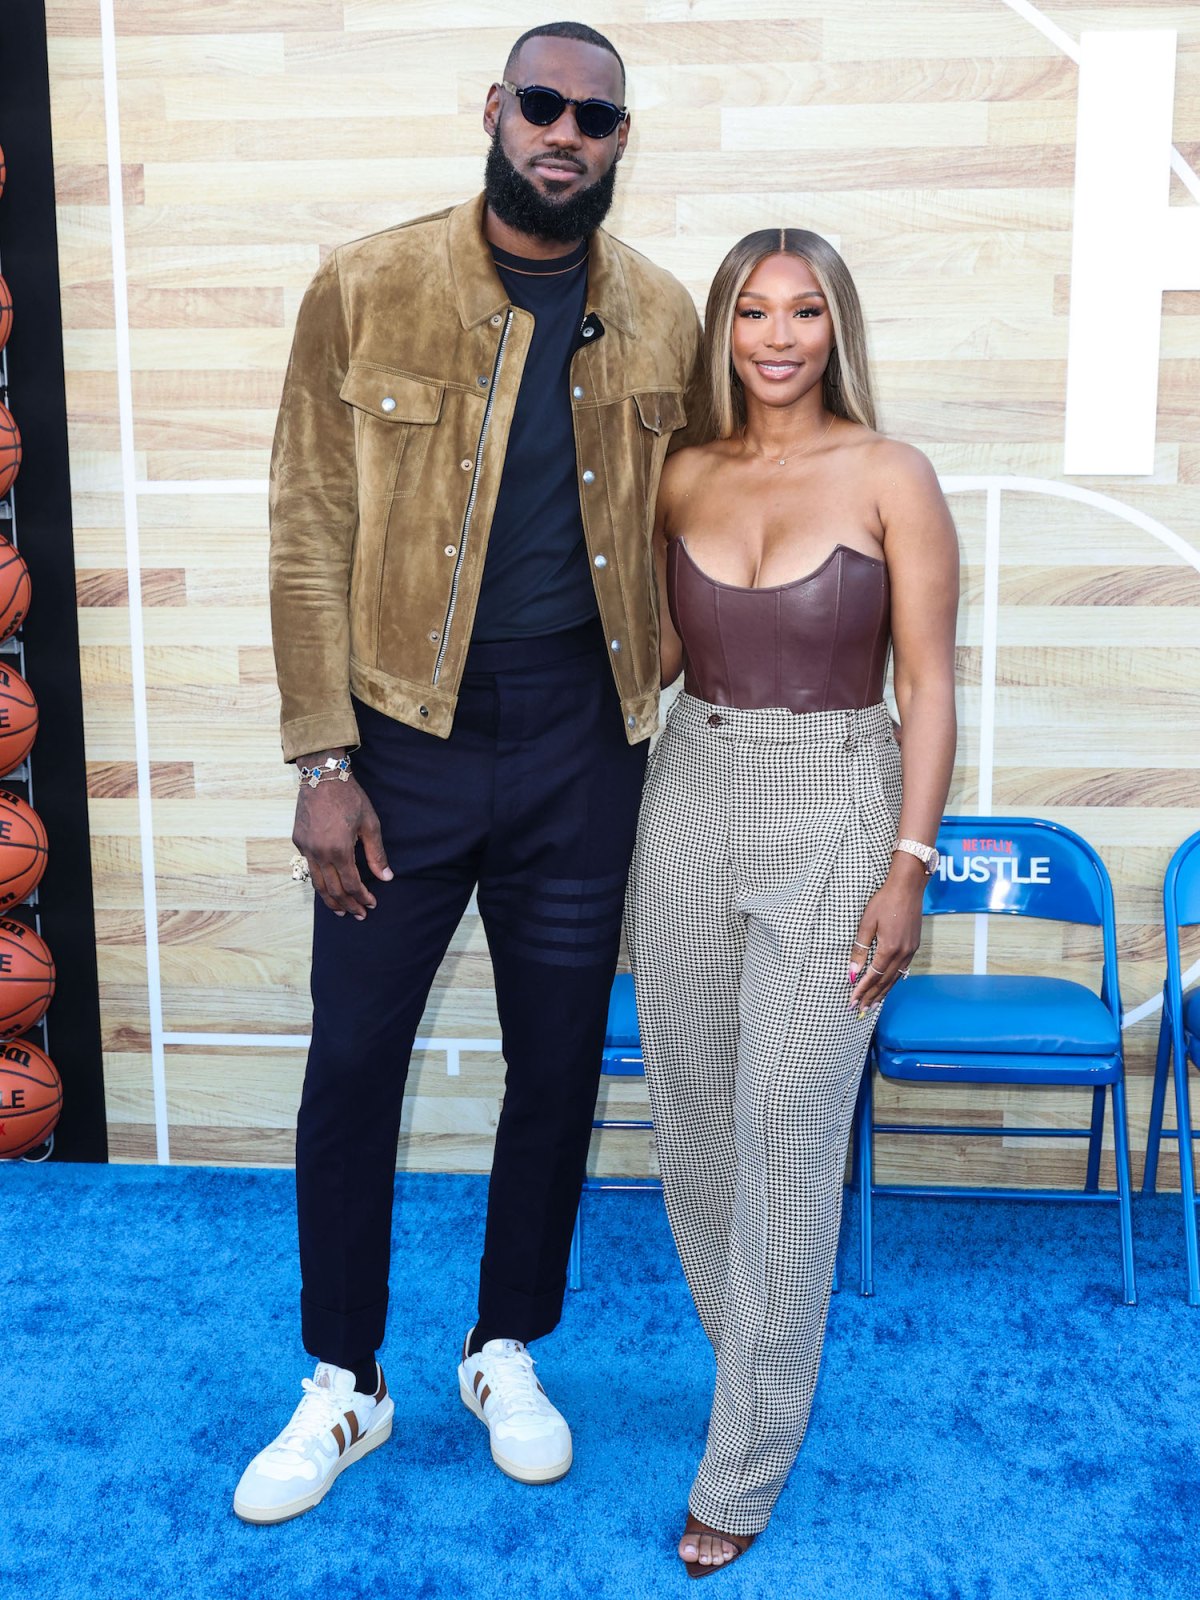 Who are the Best Dressed, Most Stylish NBA Players Right Now? - Dandelion  Chandelier